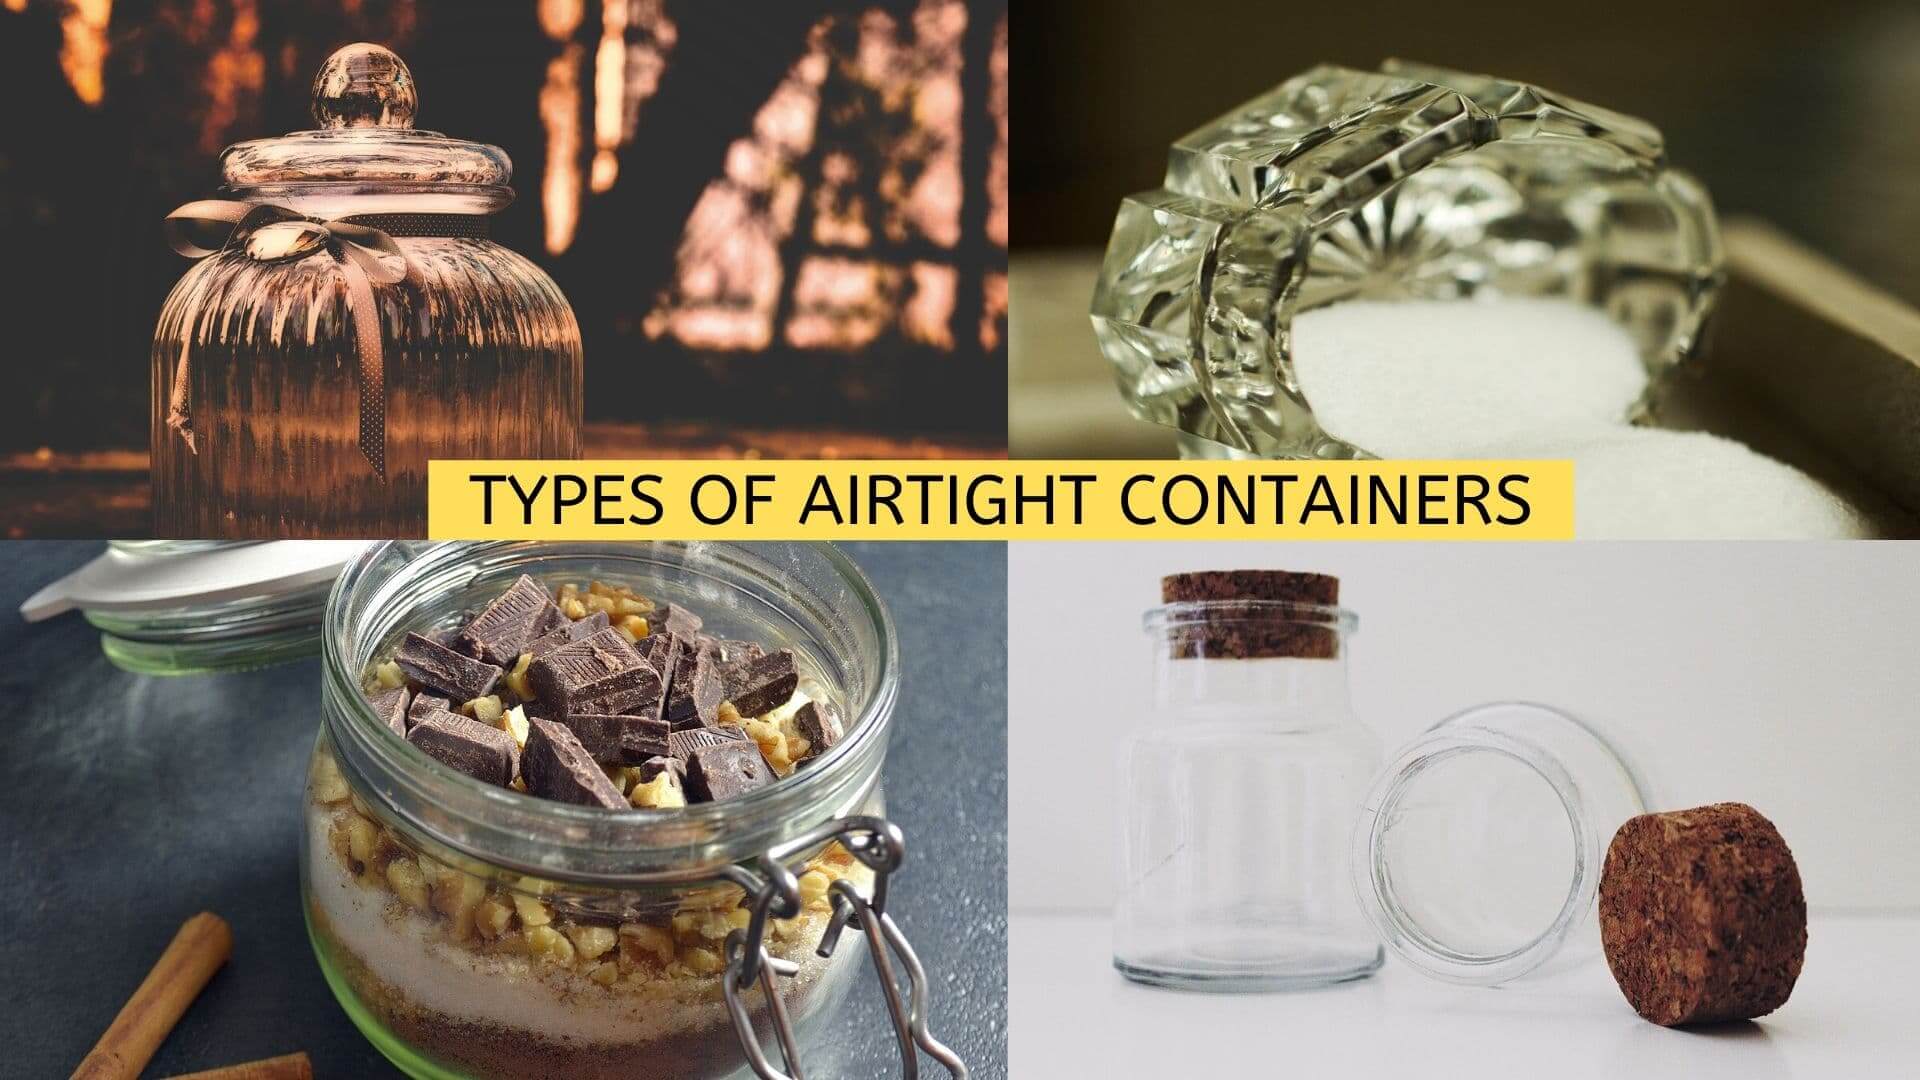 https://mishry.com/wp-content/uploads/2020/01/Types-of-Airtight-Containers.jpg